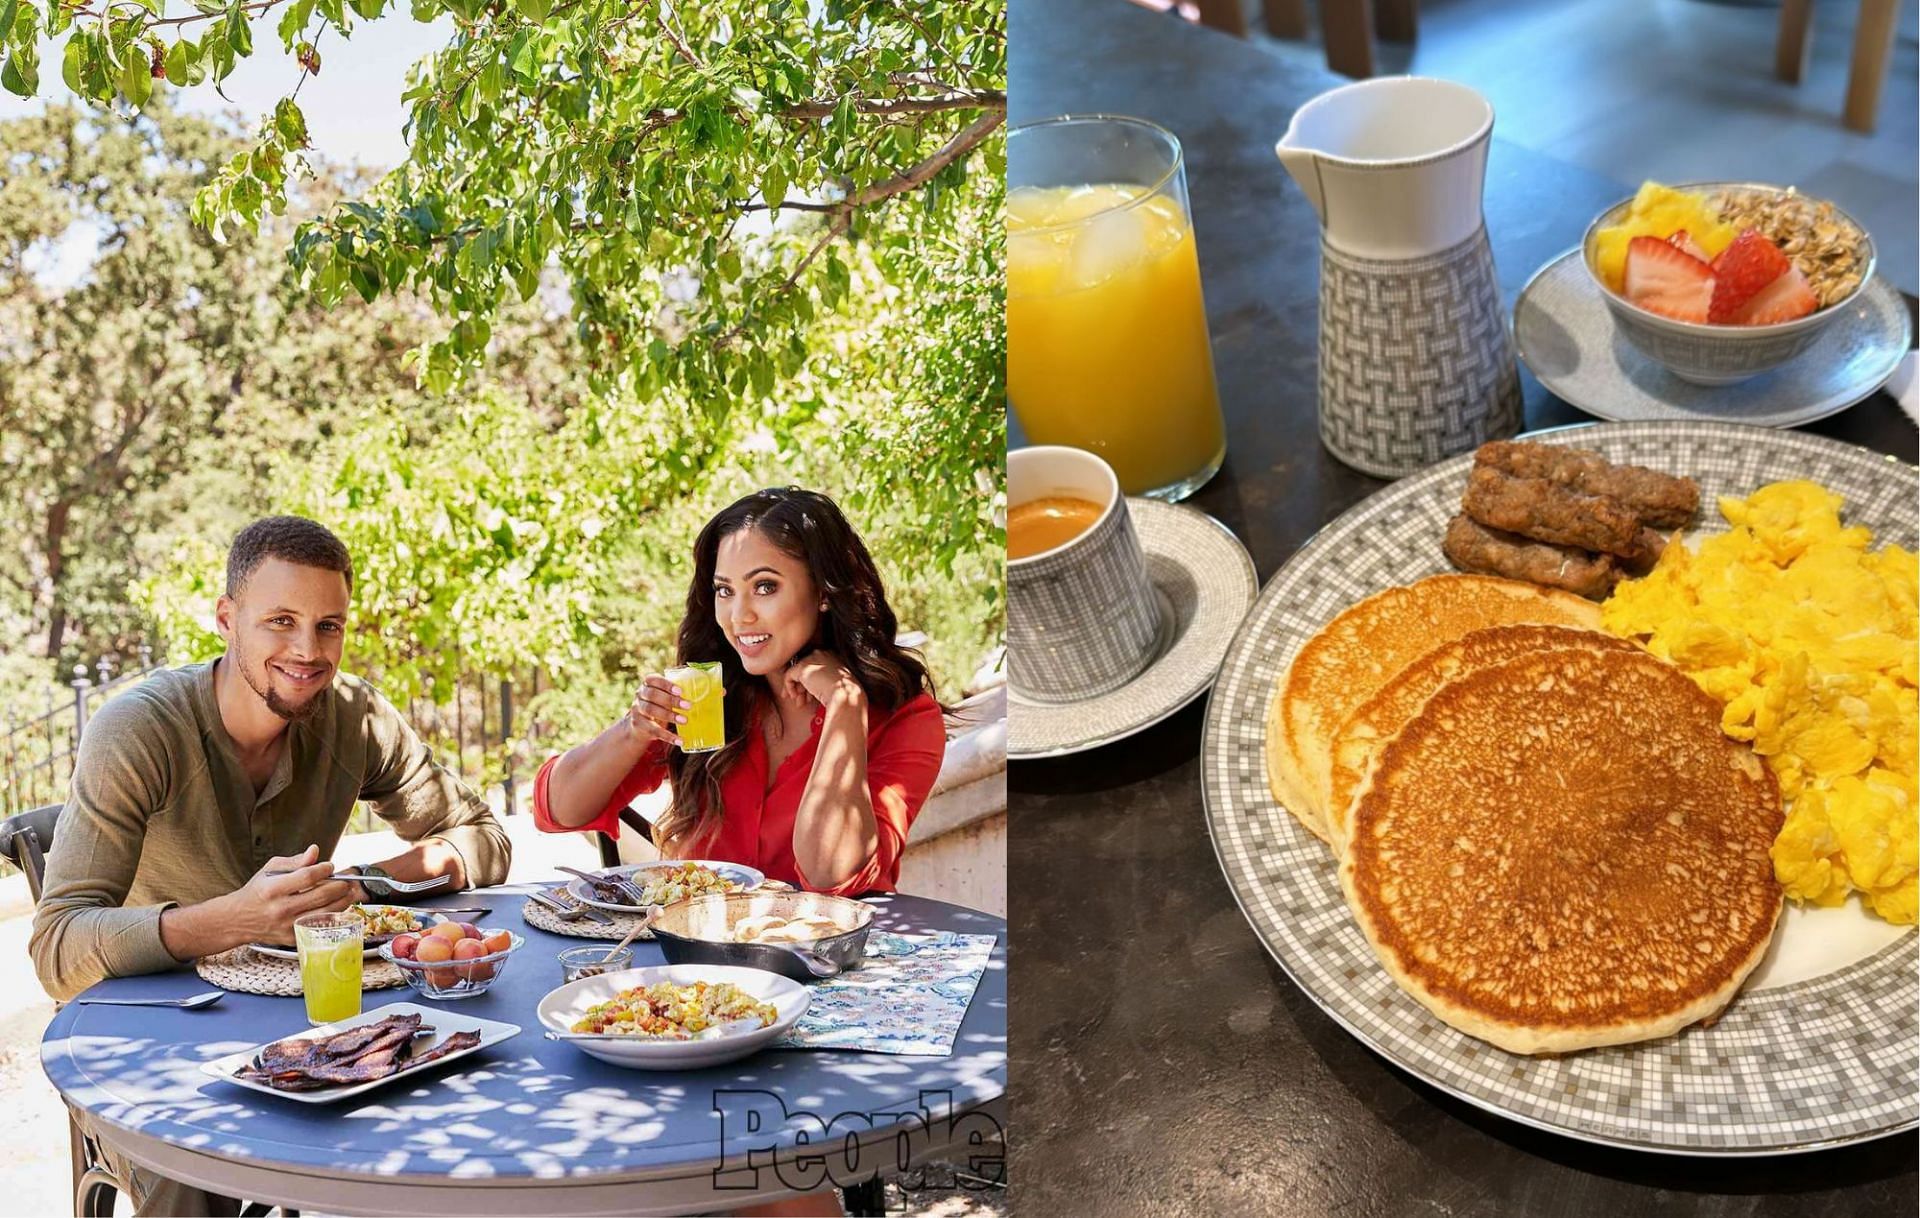 Ayesha Curry shows what she feeds Steph for breakfast before a basketball game